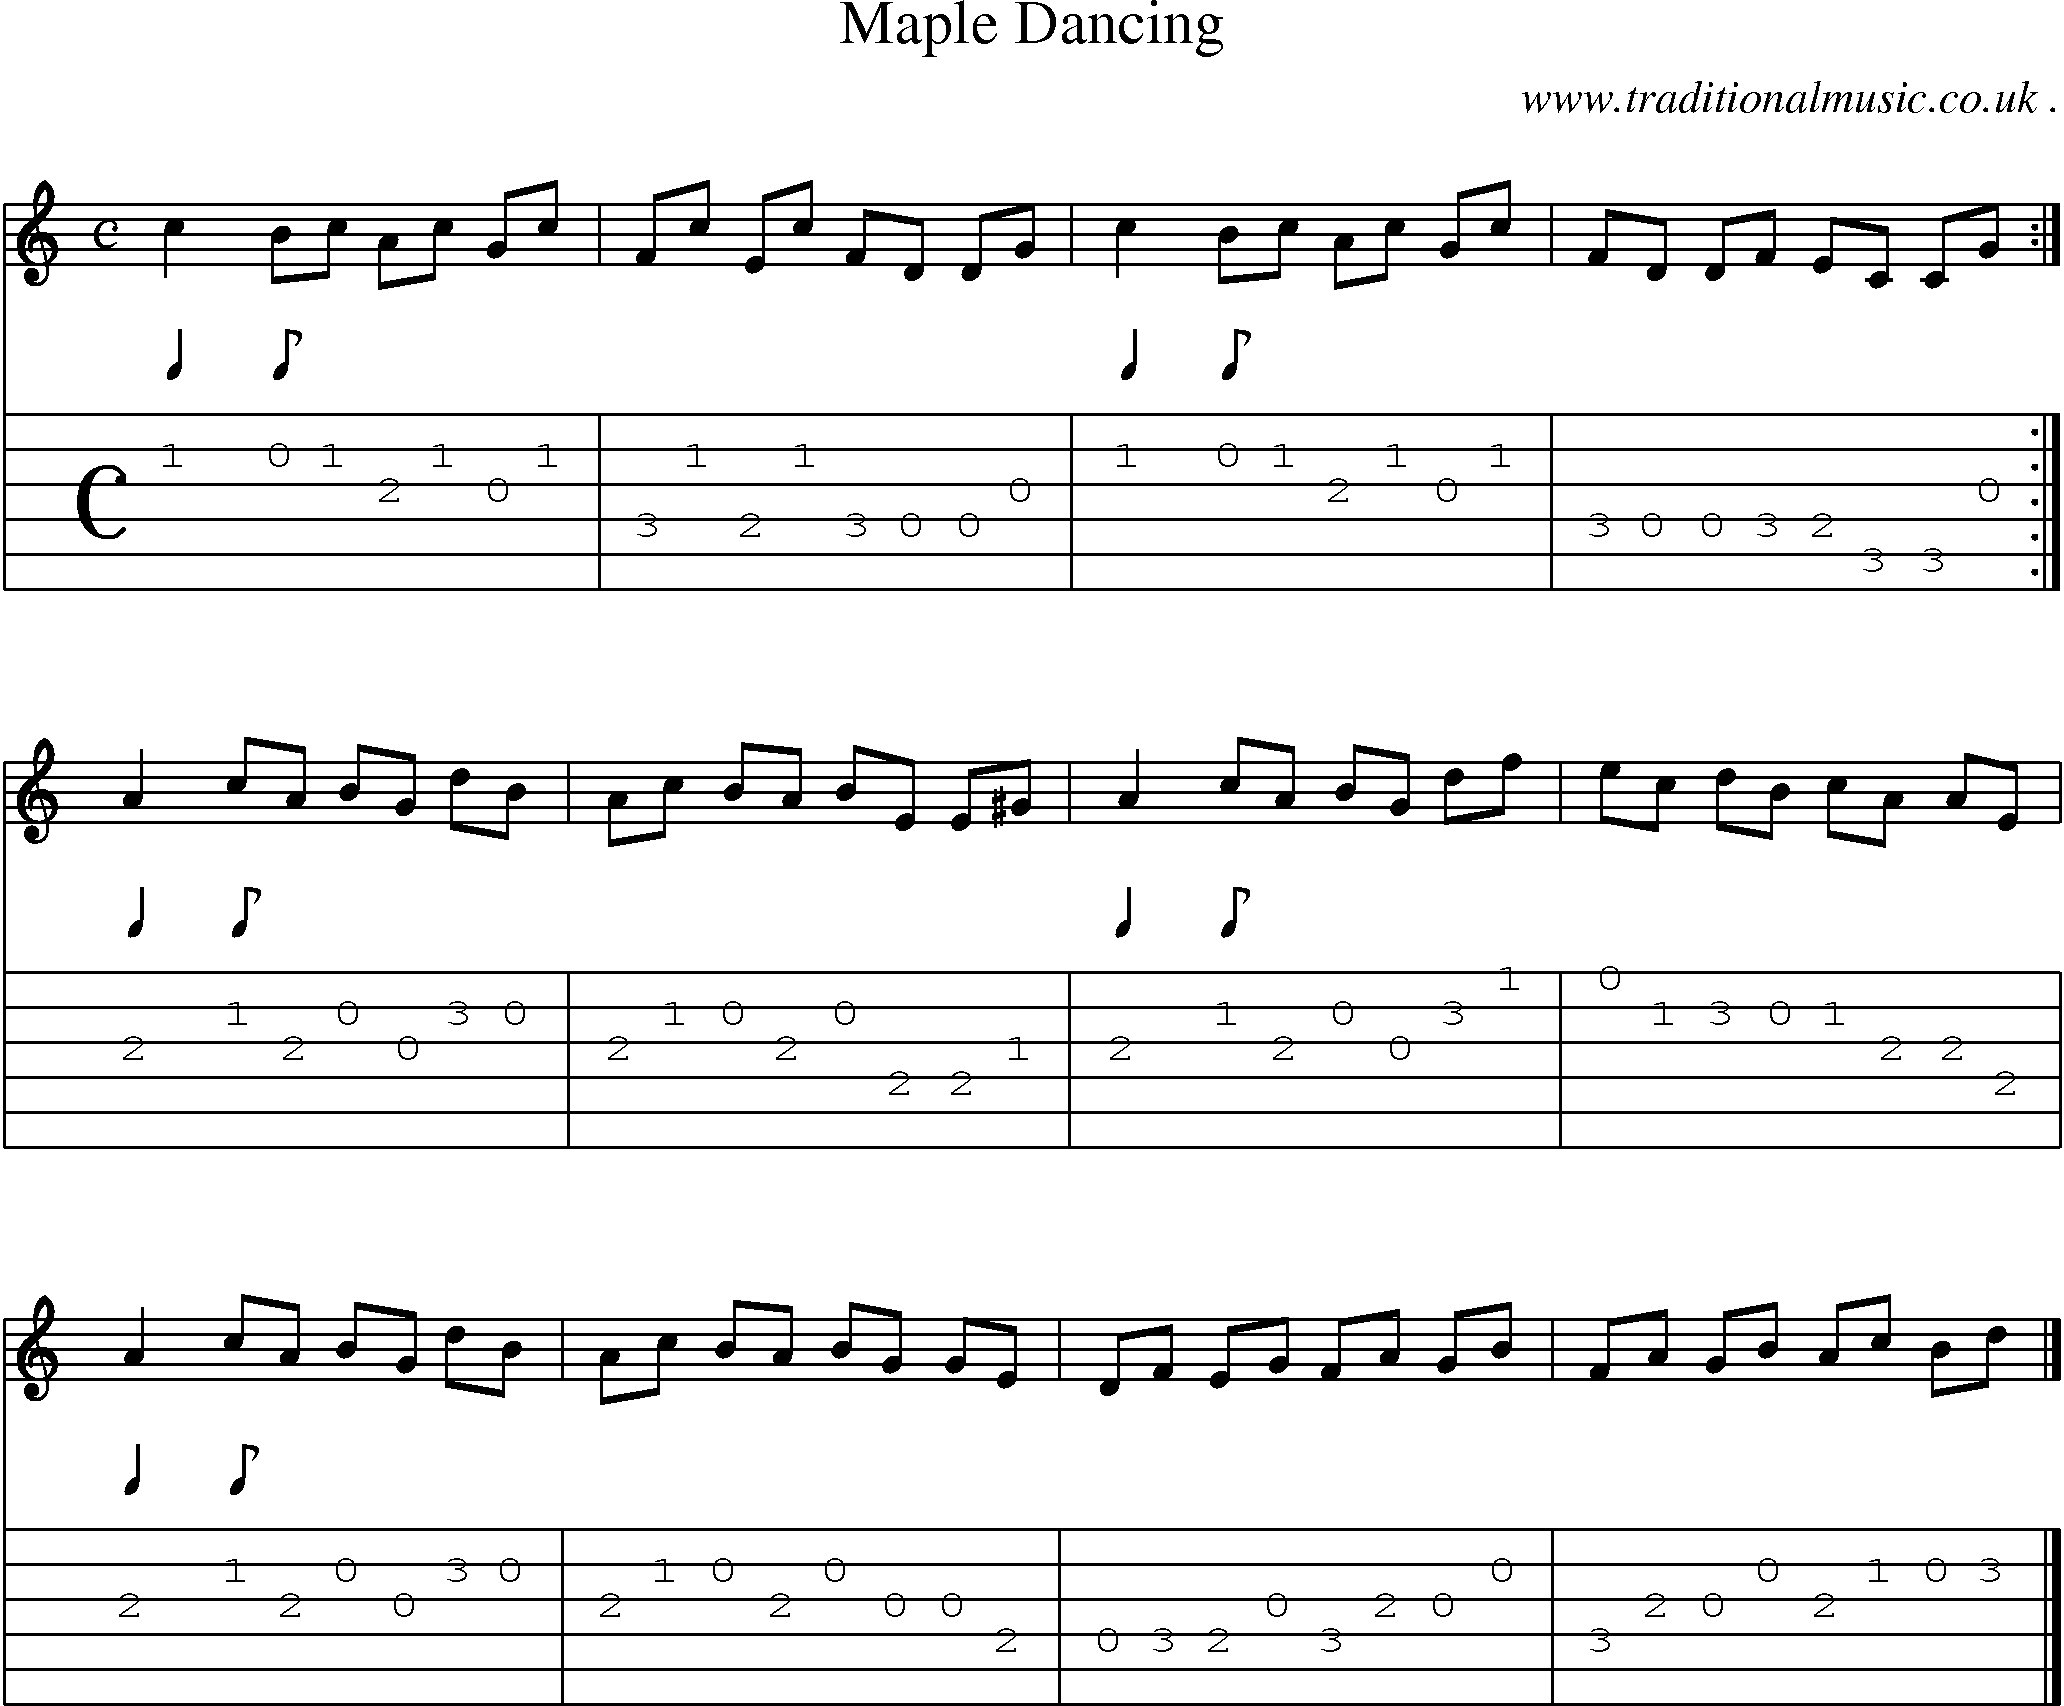 Sheet-music  score, Chords and Guitar Tabs for Maple Dancing